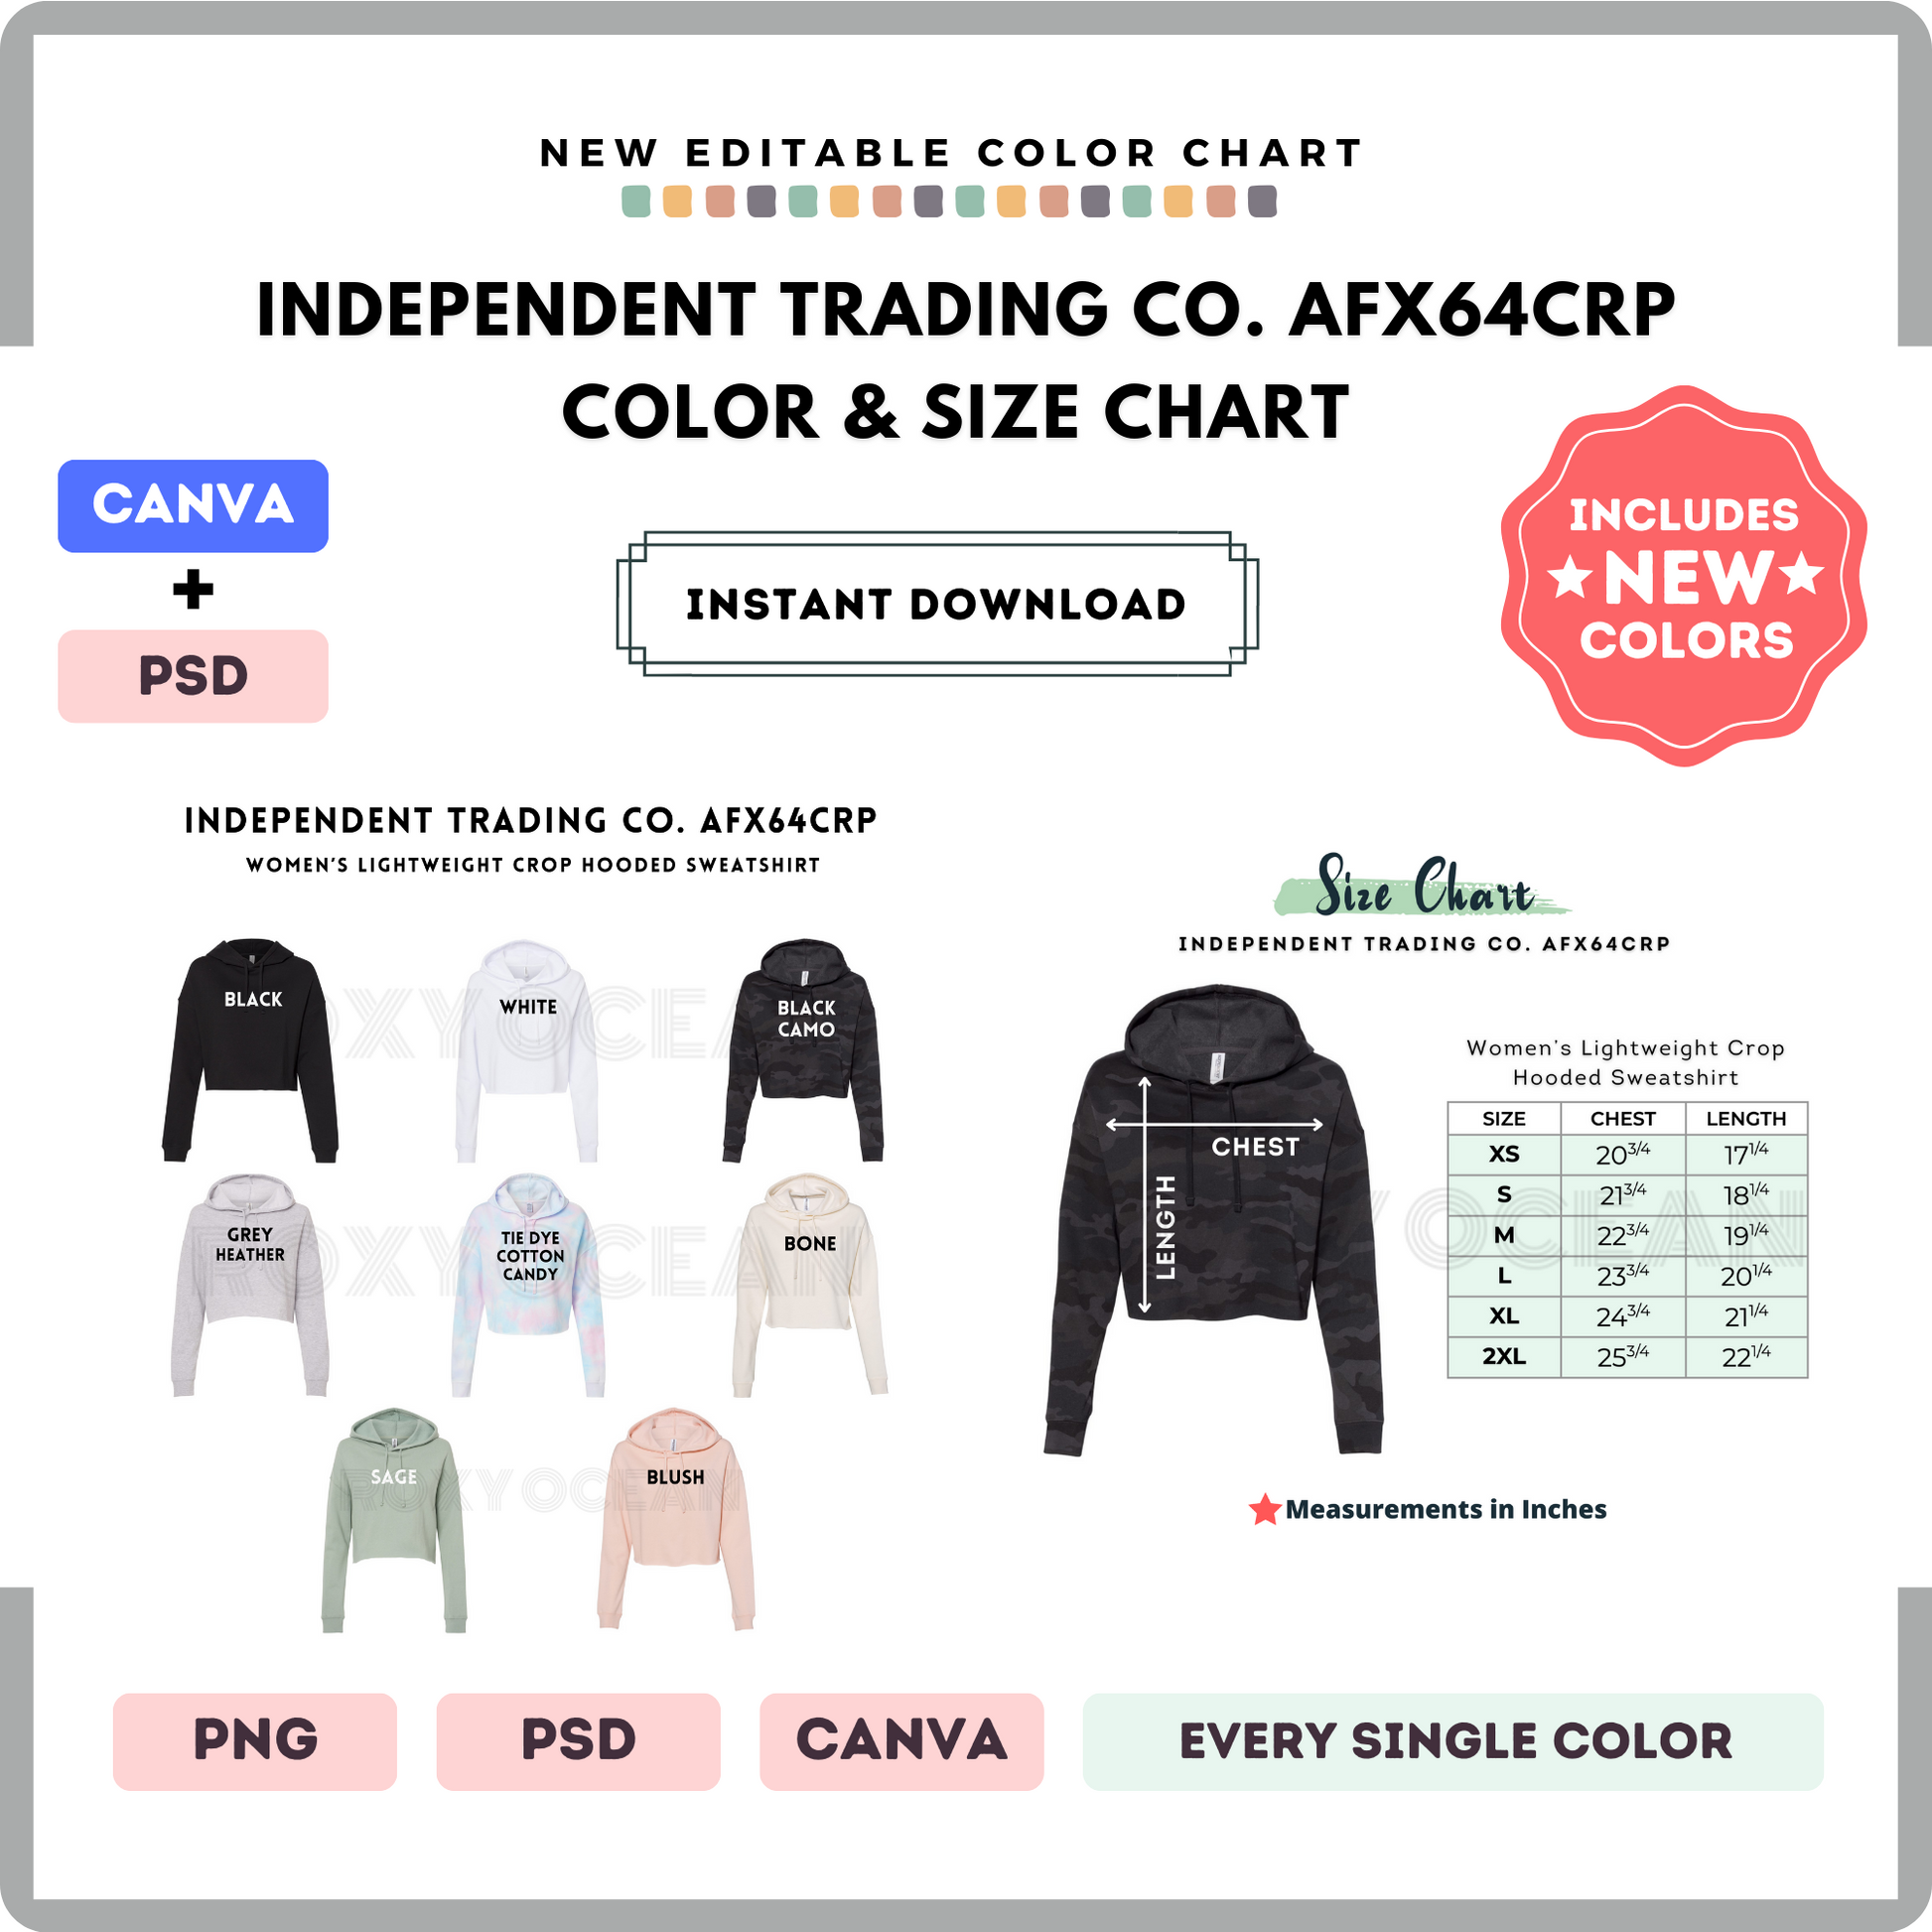 Independent Trading Co.AFX64CRP Color and Size Chart